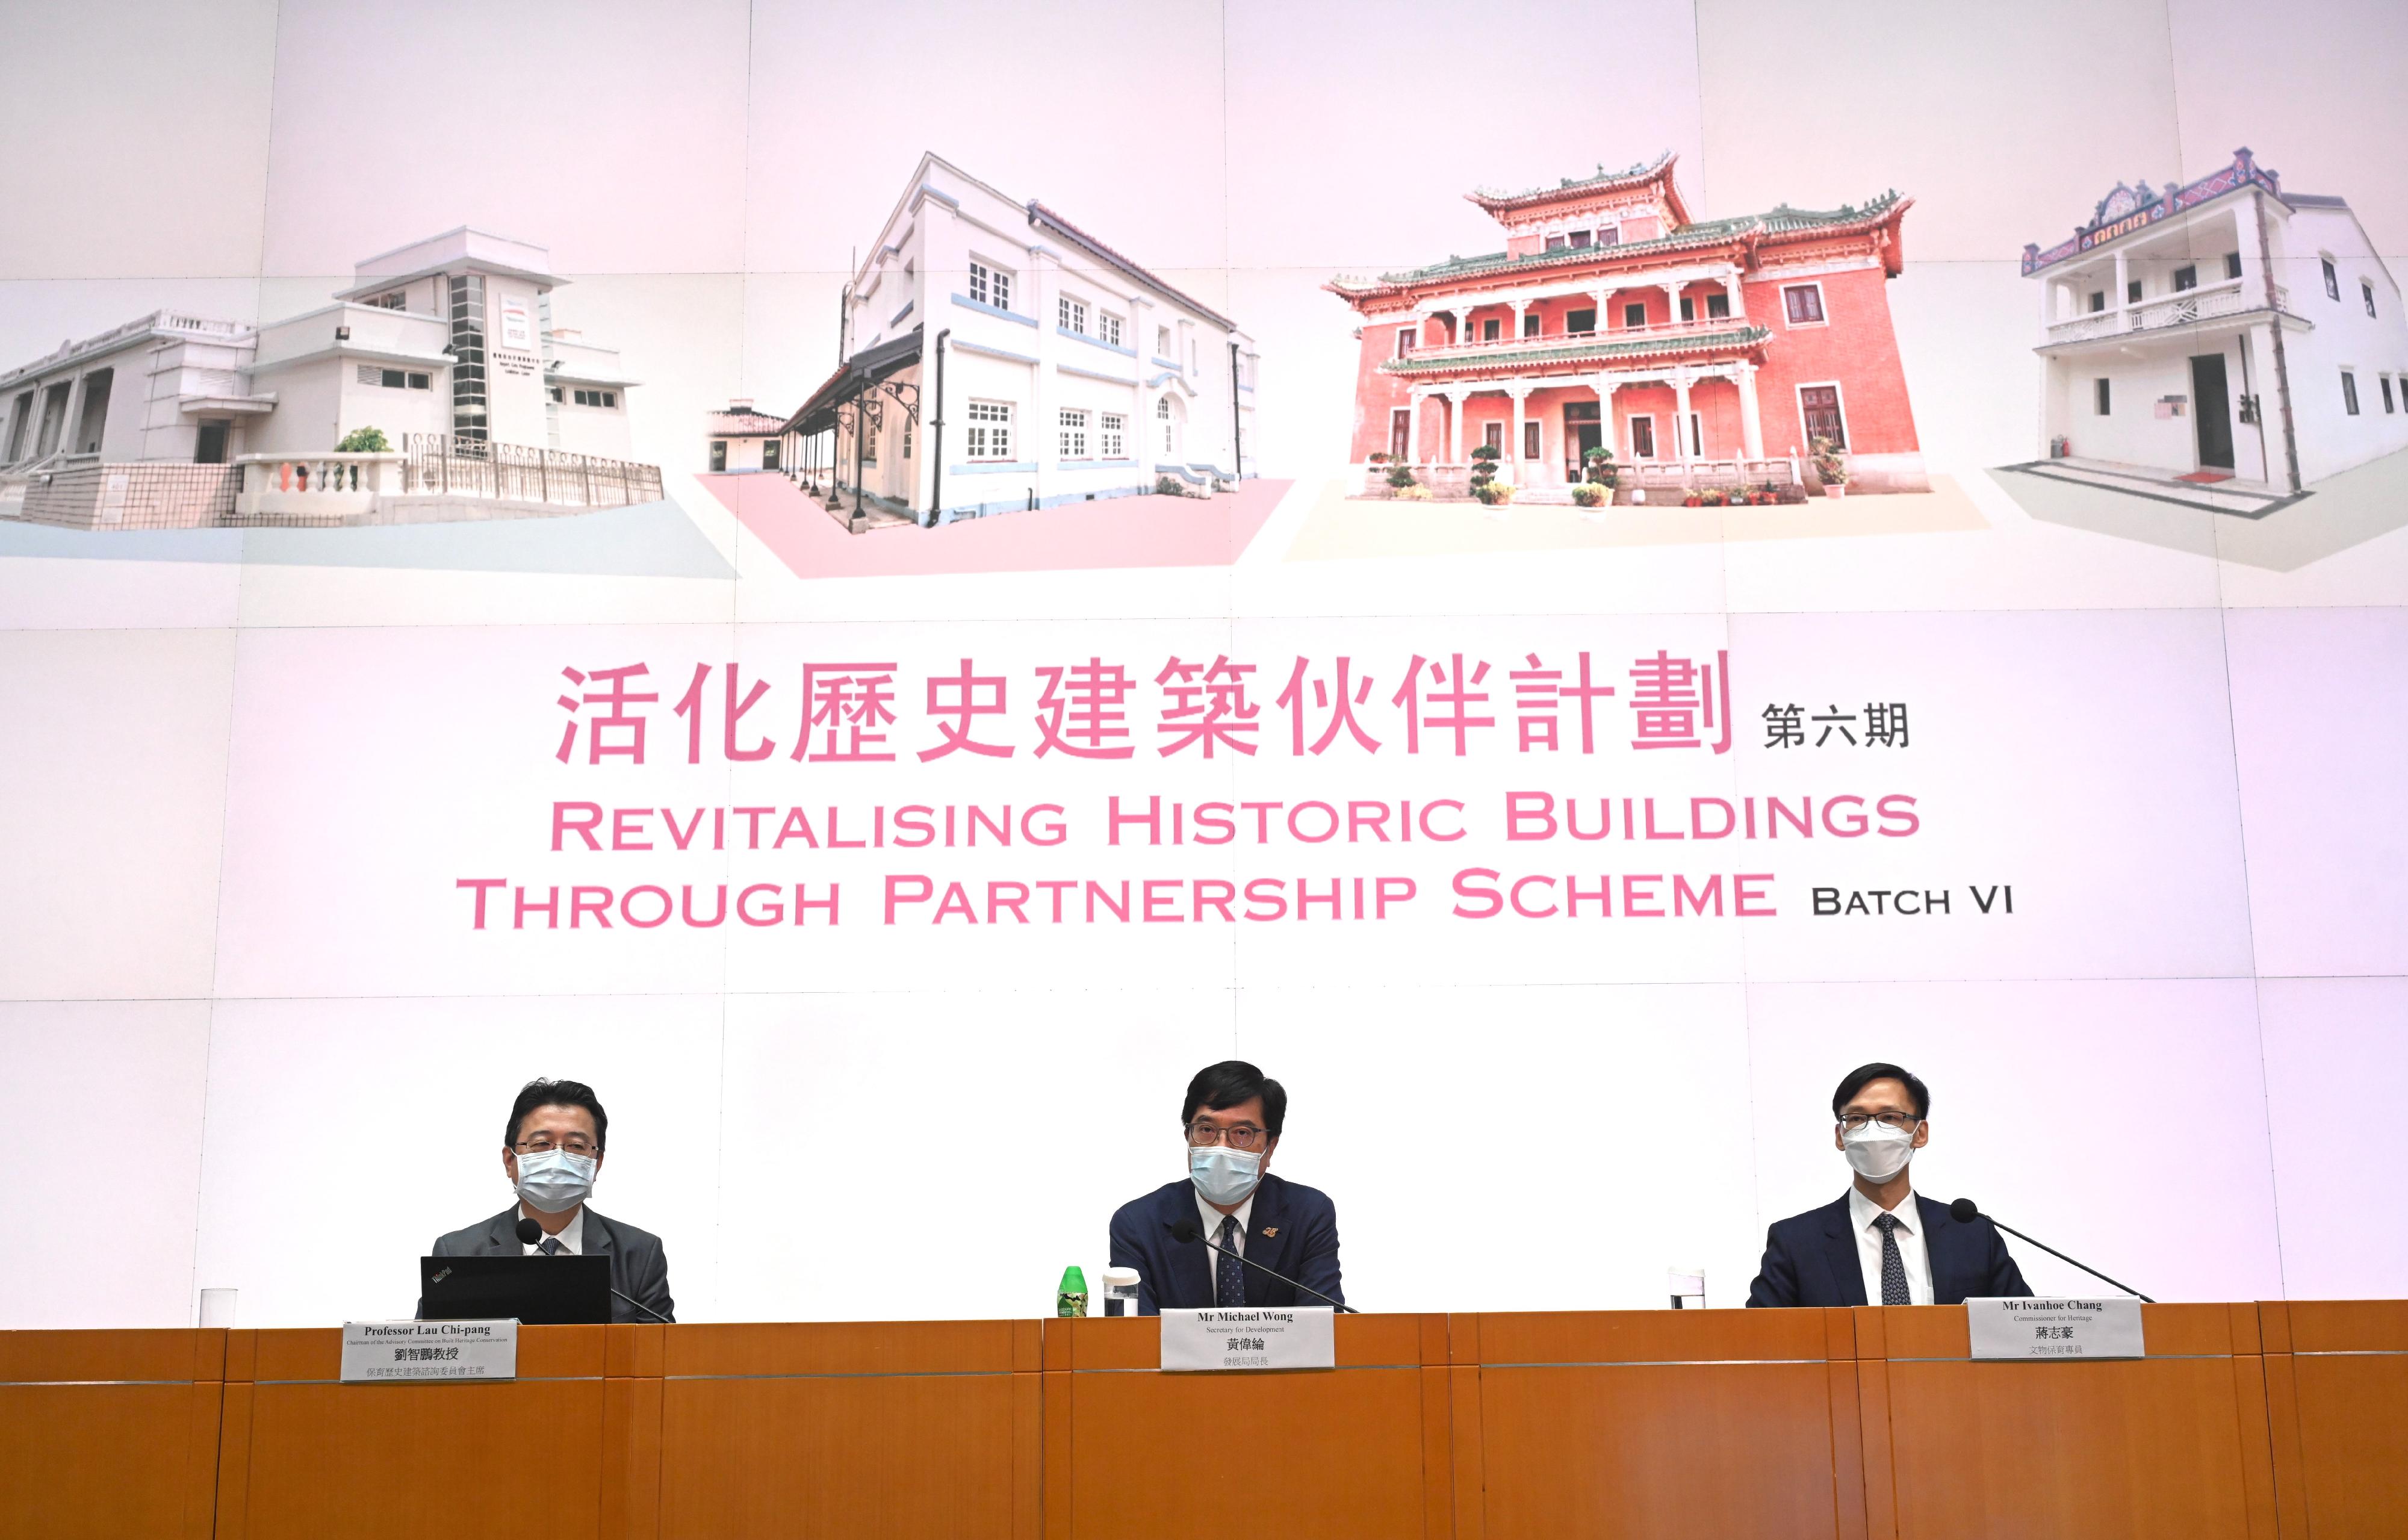 The Secretary for Development, Mr Michael Wong (centre), and the Chairman of the Advisory Committee on Built Heritage Conservation, Professor Lau Chi-pang (left), hold a press conference today (June 14) to announce the selection results for Batch VI of the Revitalising Historic Buildings Through Partnership Scheme. Also present is the Commissioner for Heritage, Mr Ivanhoe Chang (right).